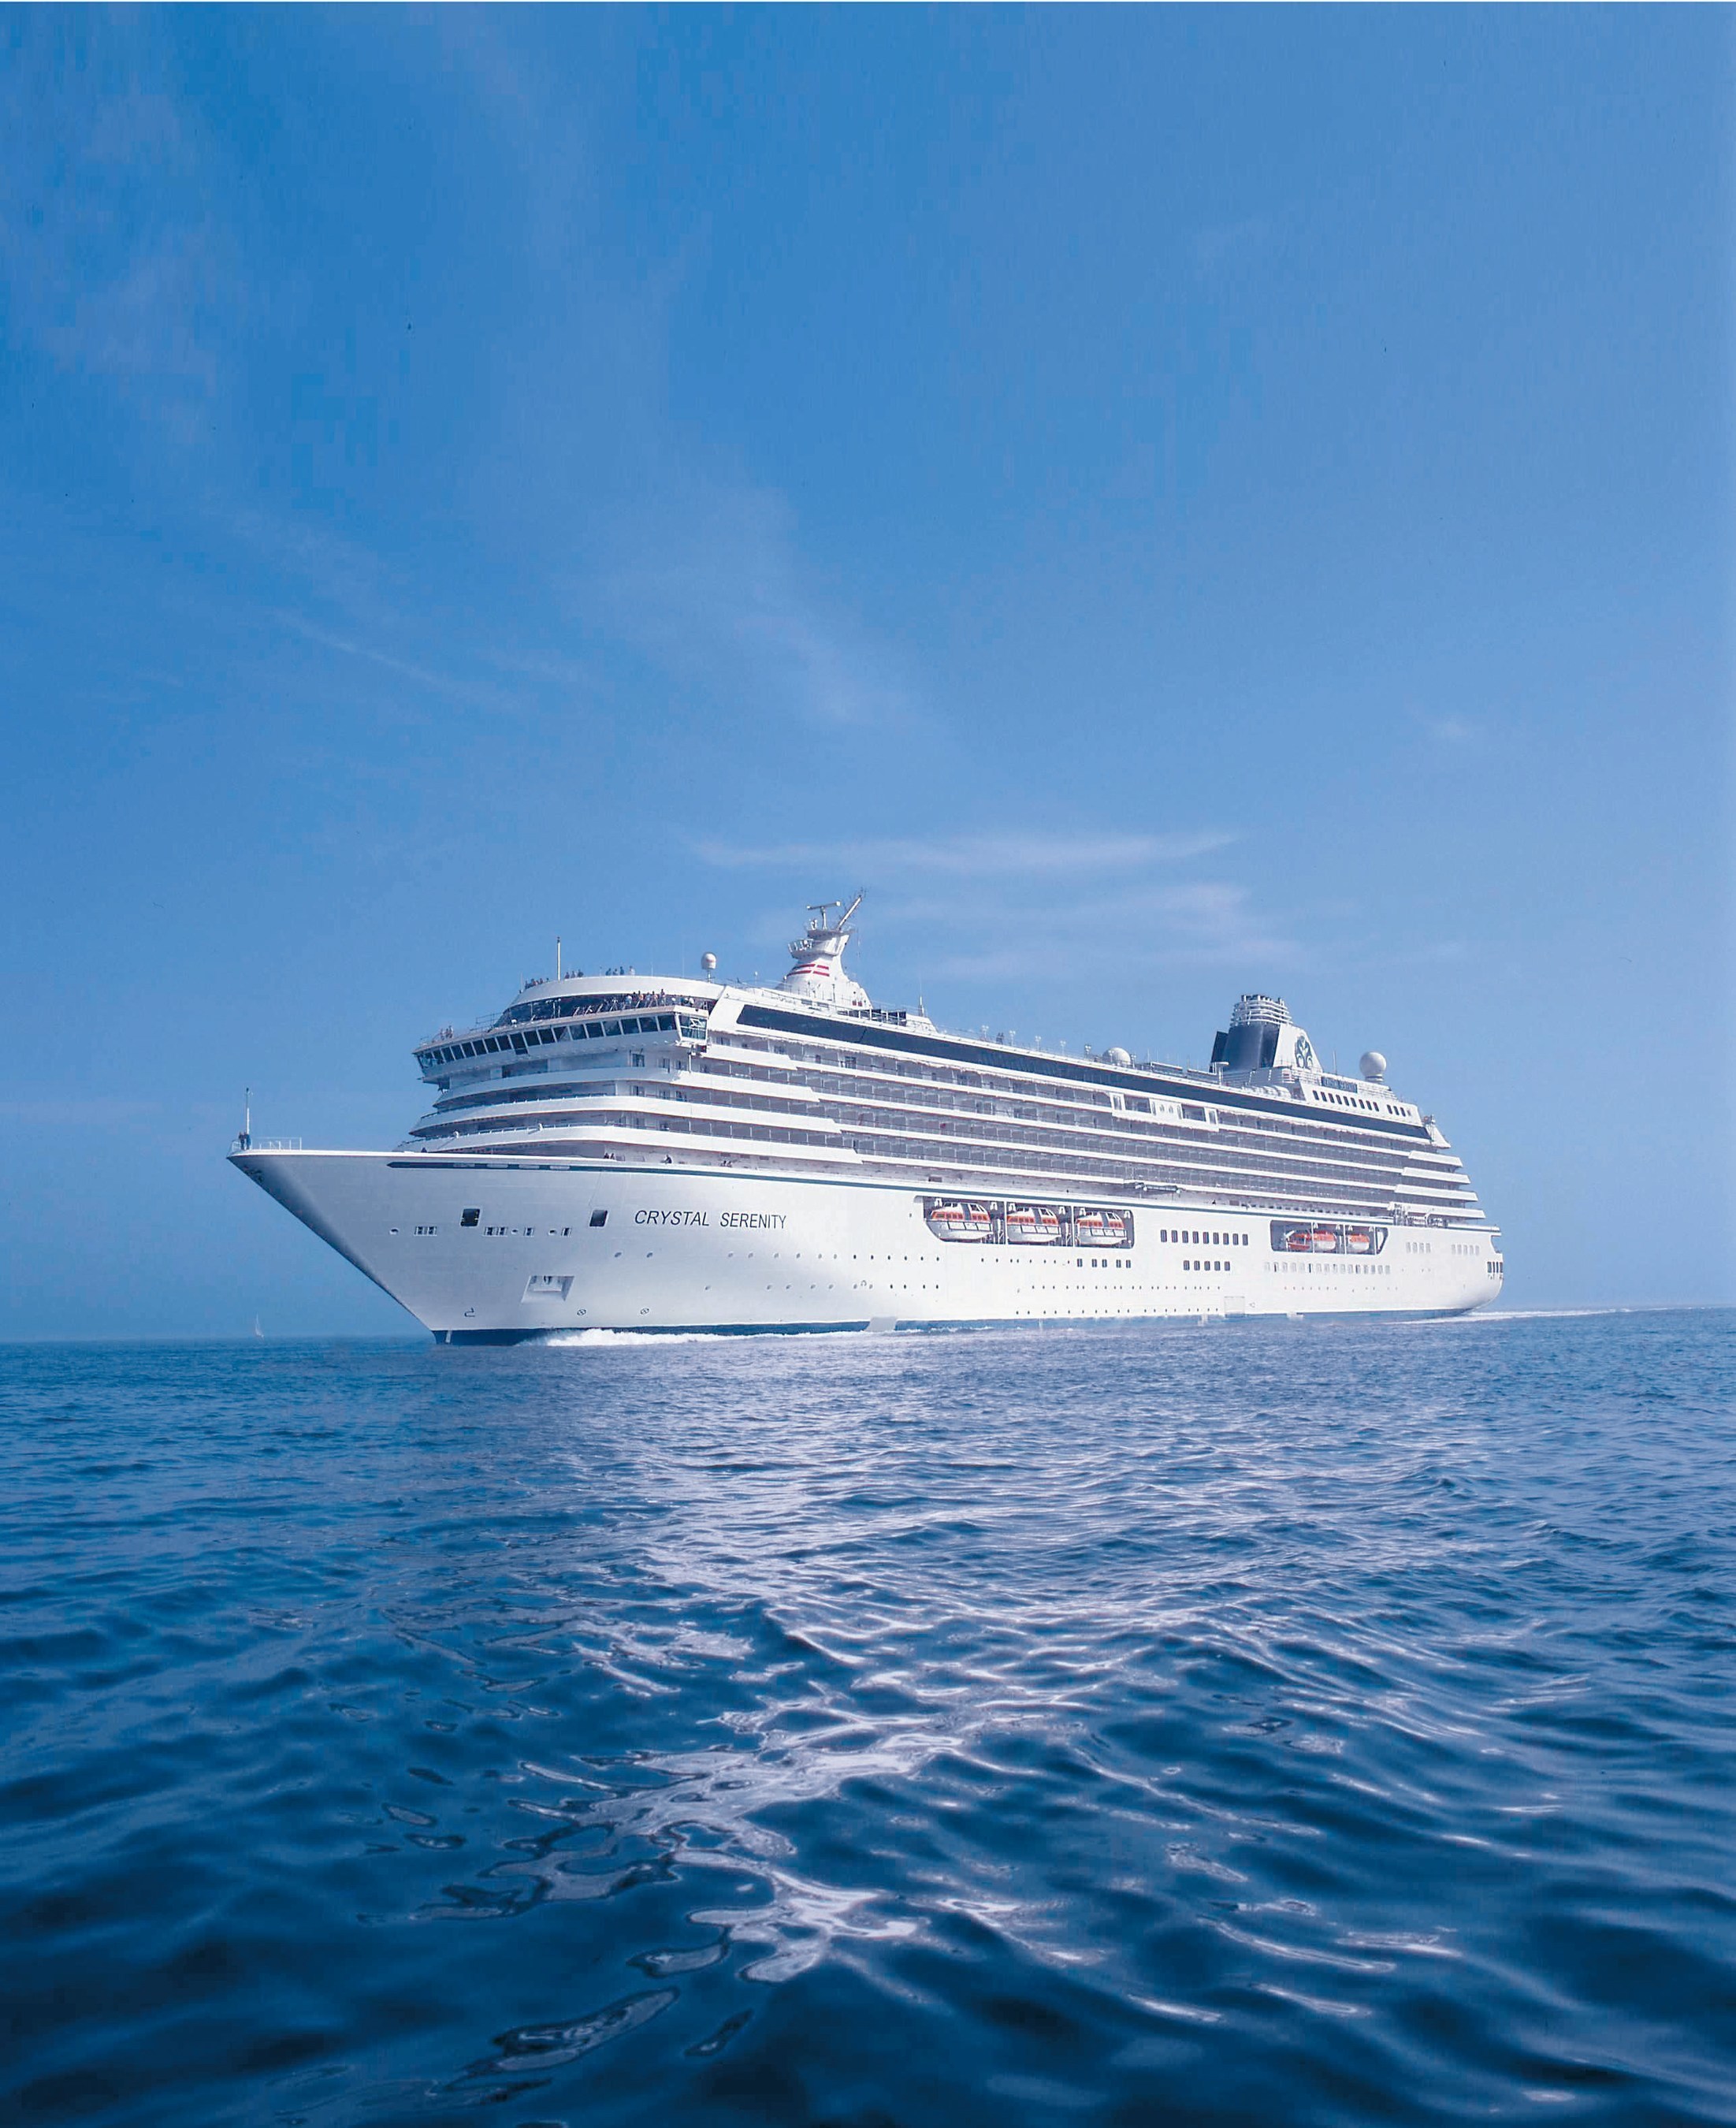 Focused on the metropolitan cities, quaint villages, less-visited islands and up-and-coming destinations of South America and the Caribbean - plus the first World Cruise visit to Antarctica in 10 years - Crystal's' 94-day journey sails round-trip from Miami aboard Crystal Serenity, embarking on January 10, 2017.